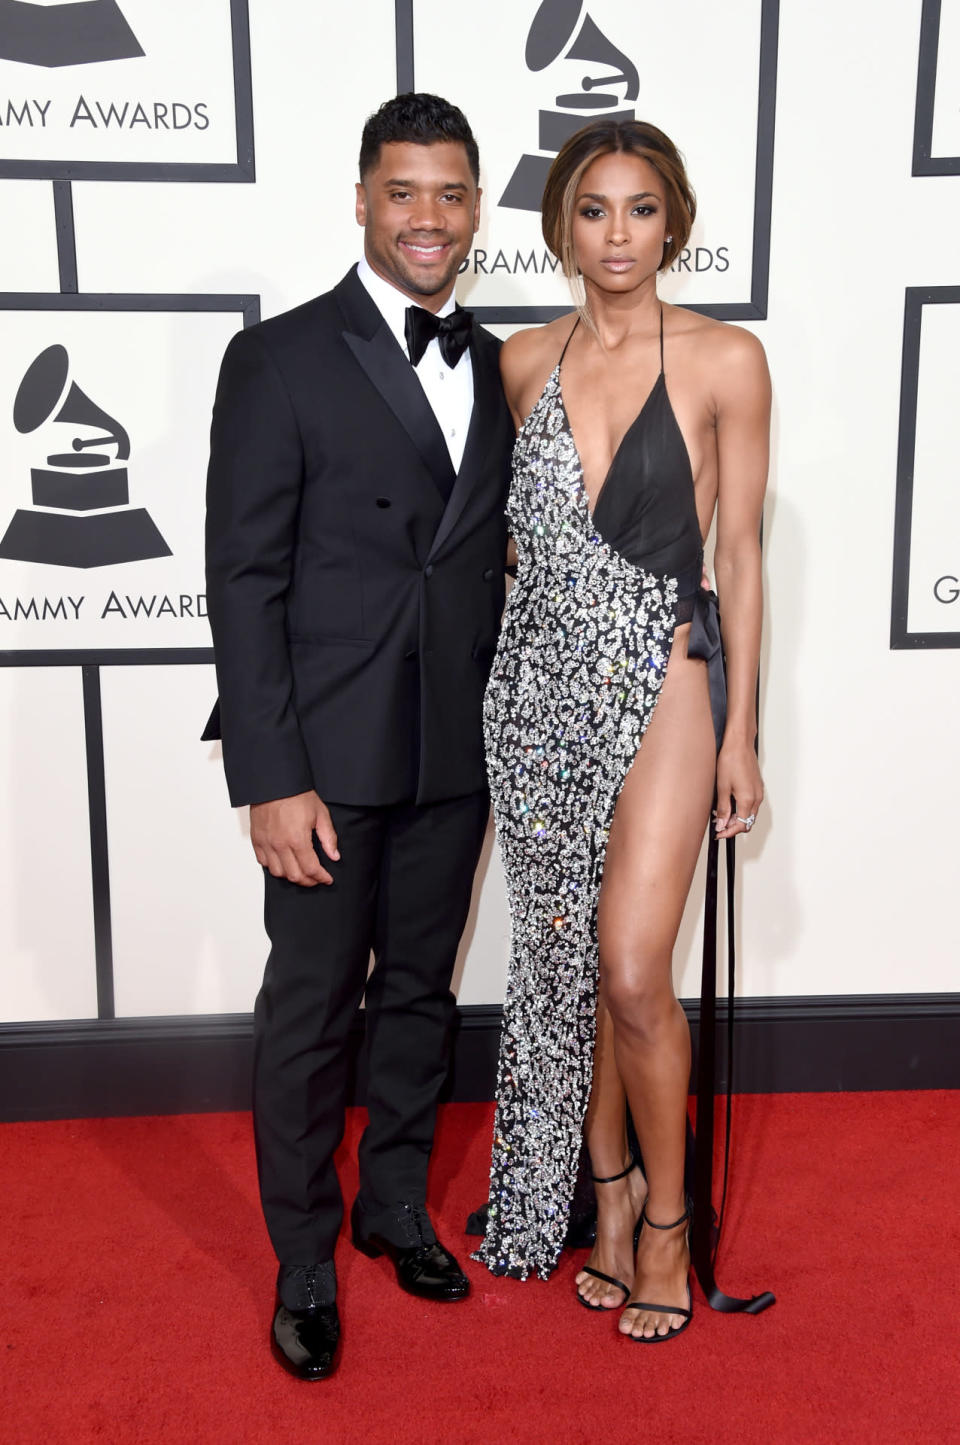 Best: Ciara rocking a Alexandre Vauthier dress with the highest leg slit (maybe of all time) with her boyfriend Russell Wilson at the 58th Grammy Awards at Staples Center in Los Angeles, California, on February 15, 2016.